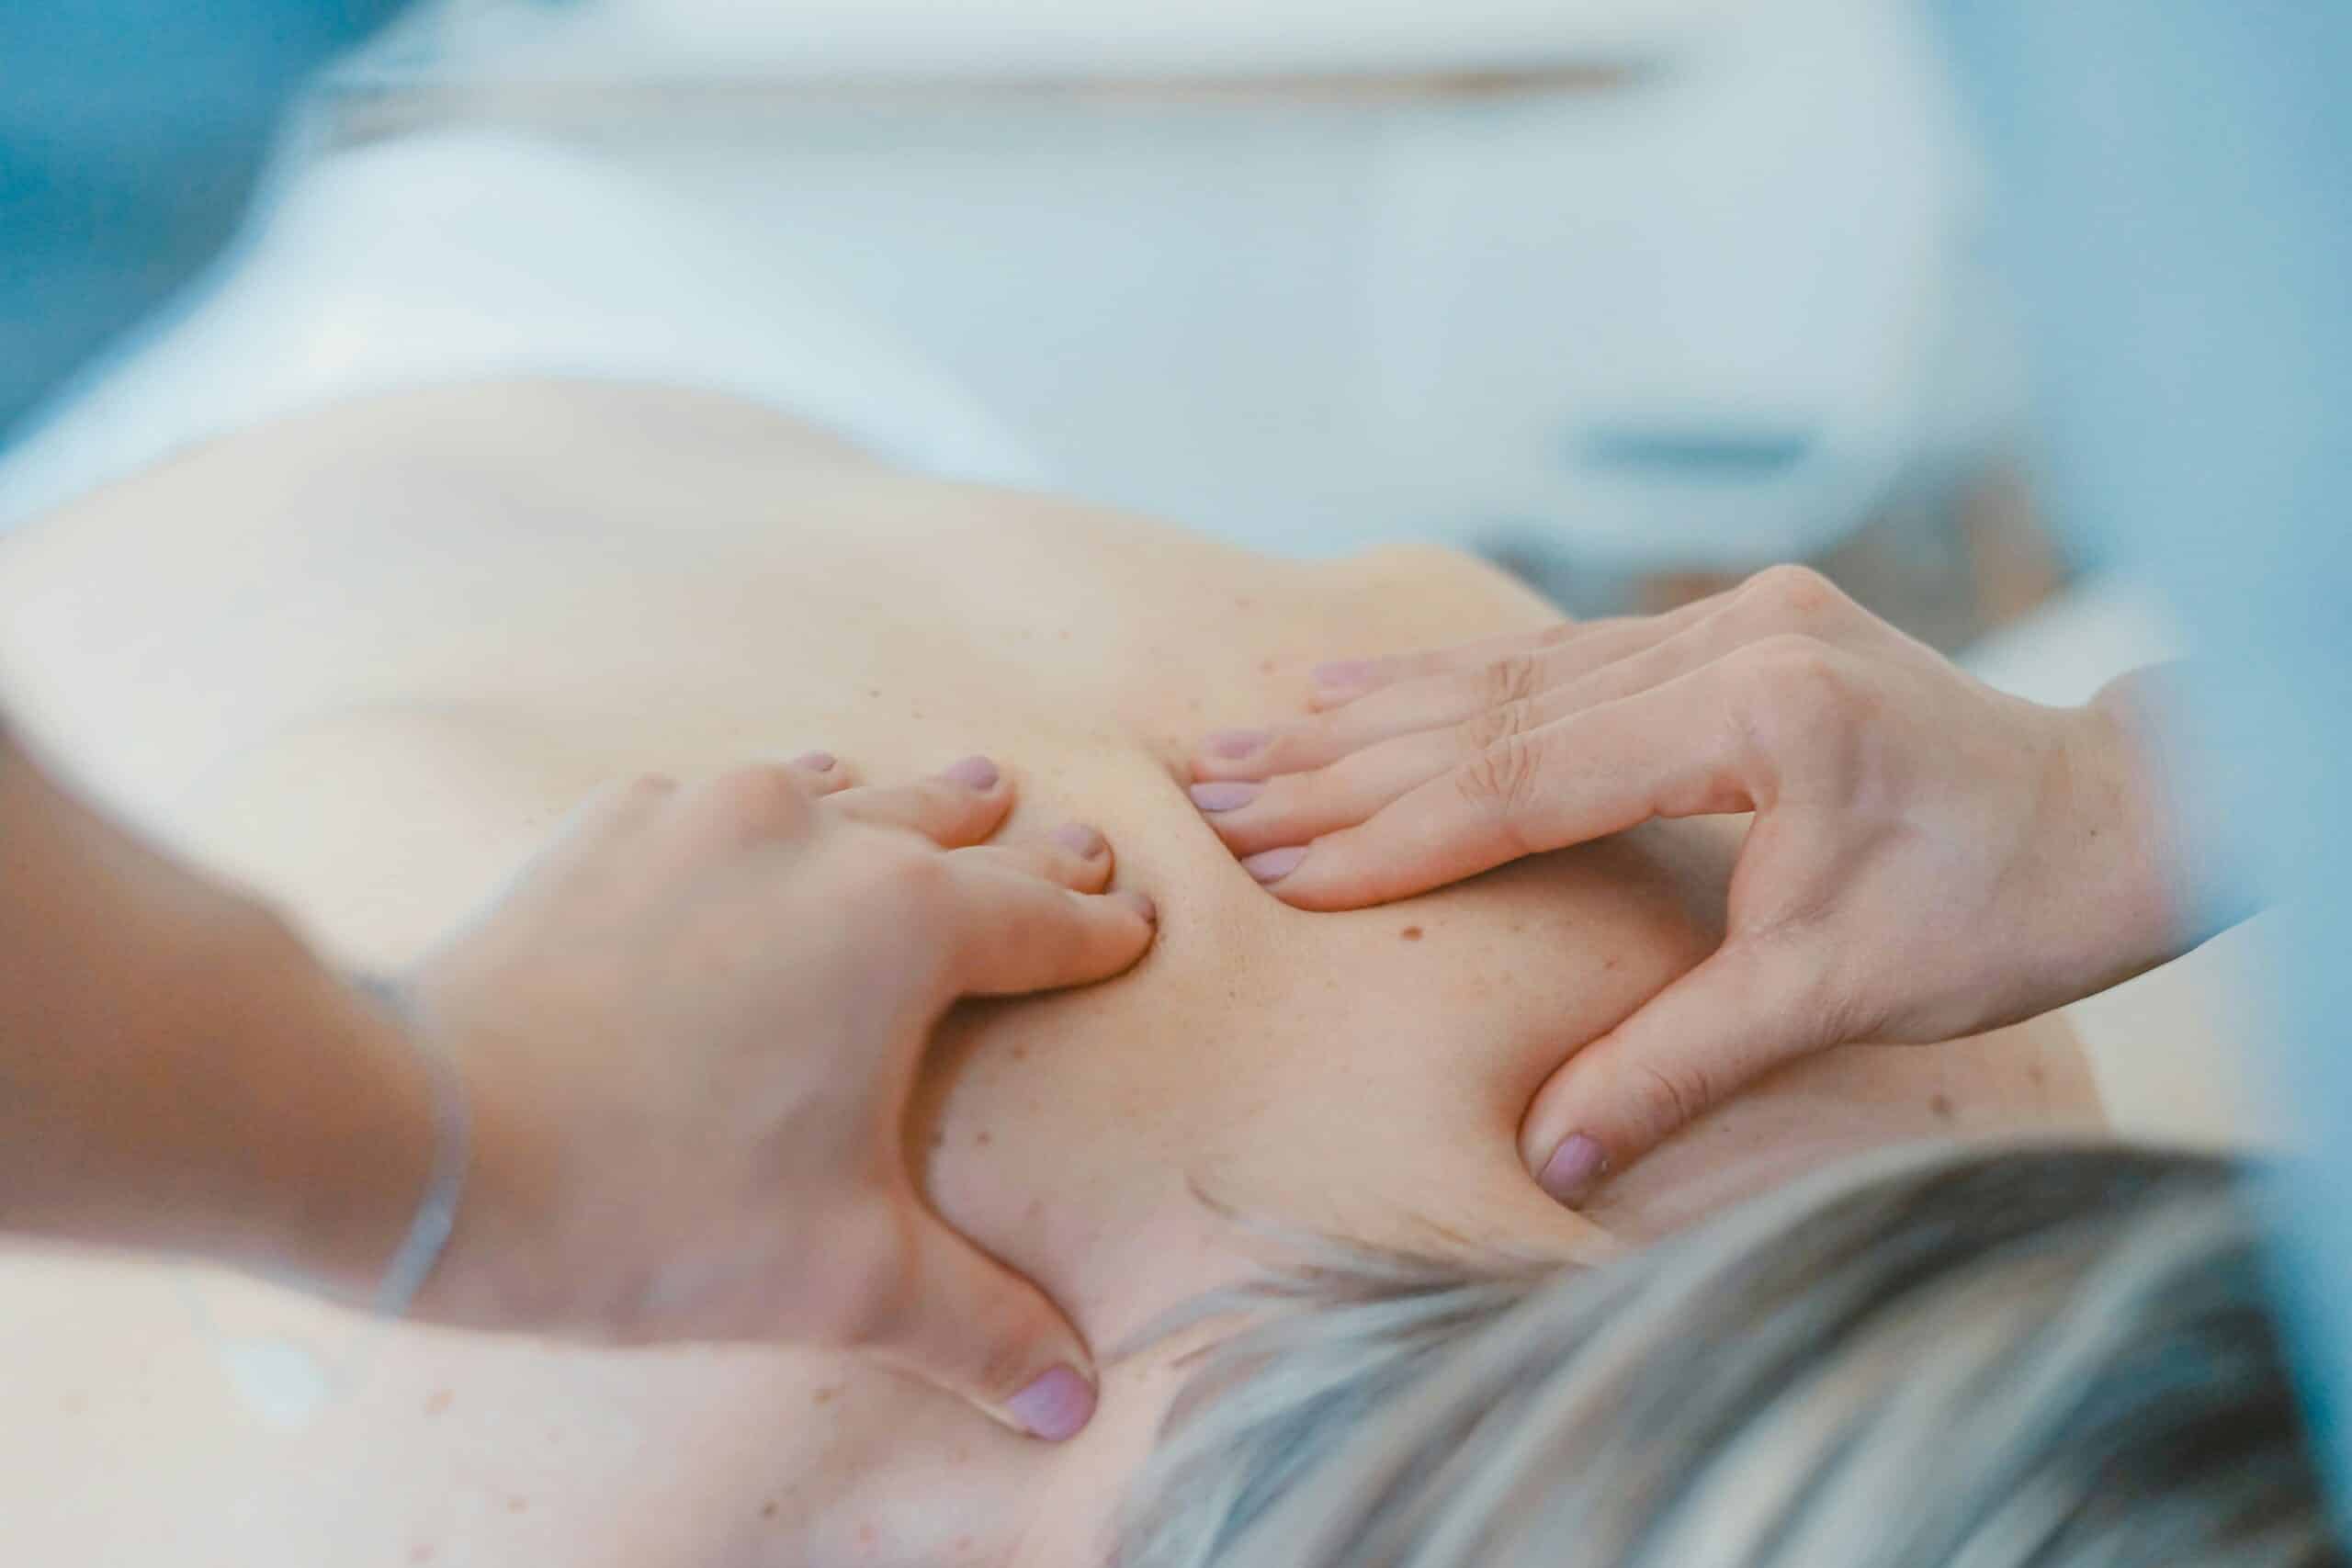 Woman receiving a massage to release toxins